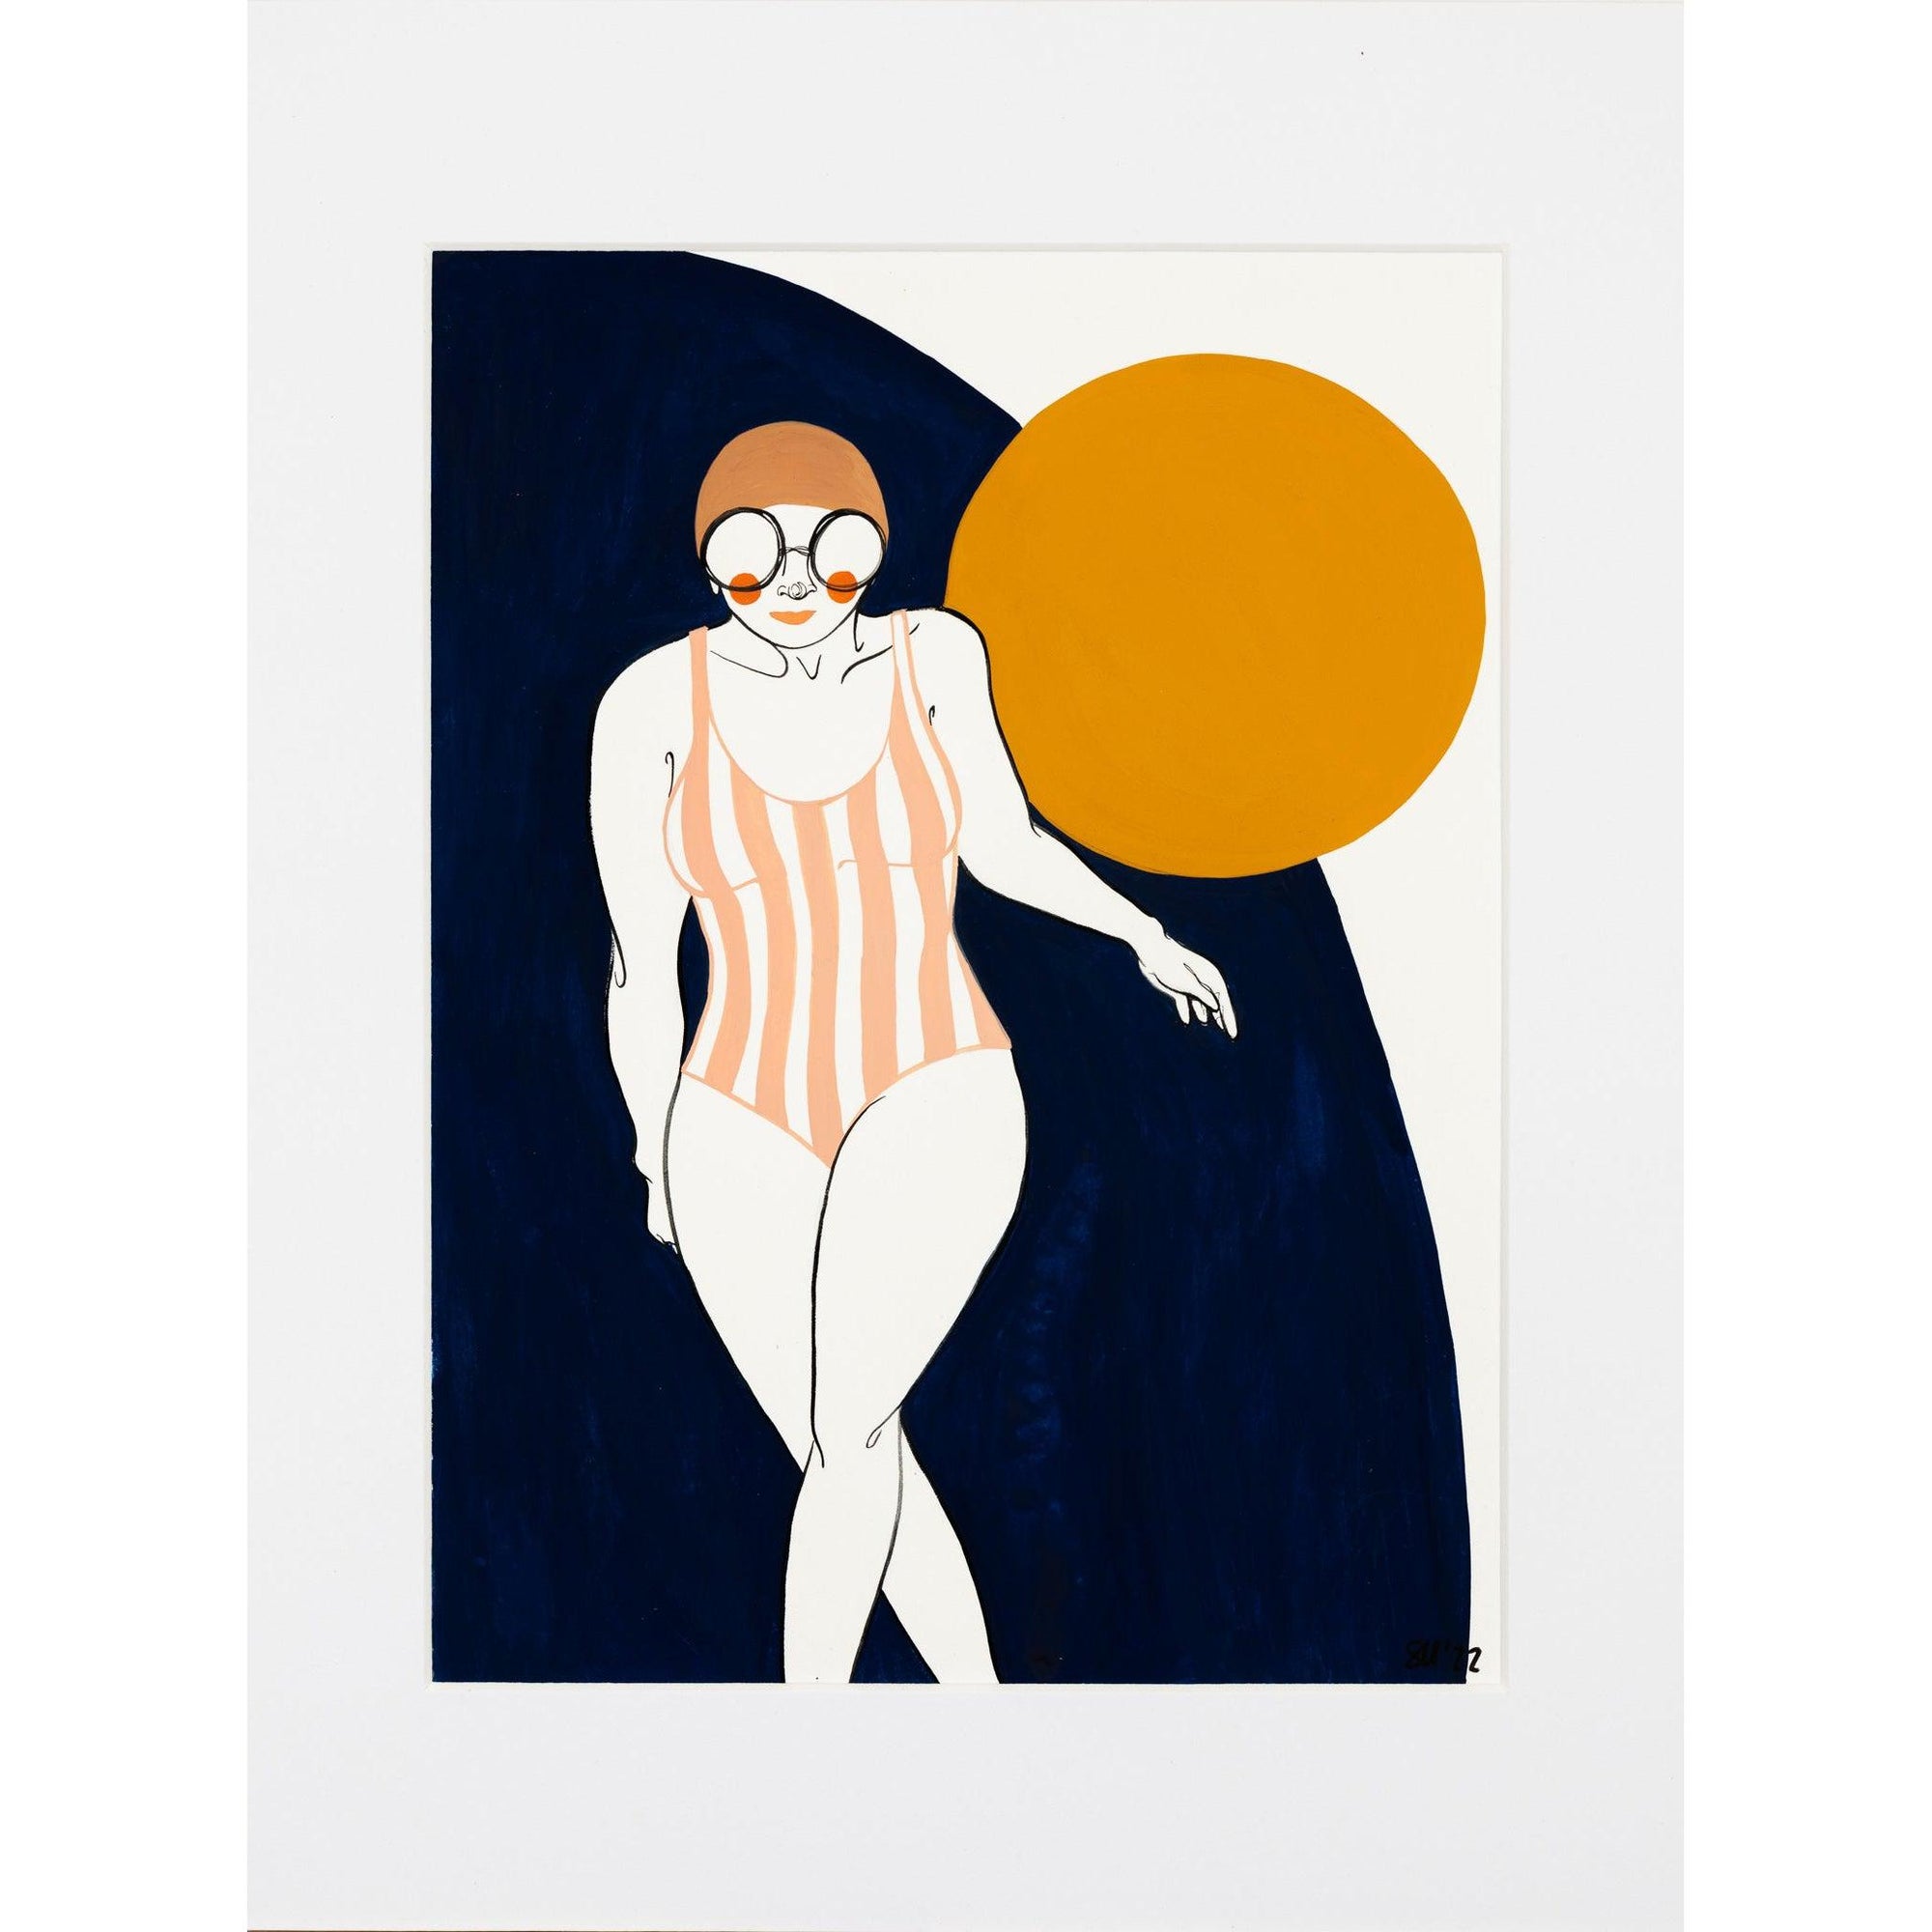 'Sunset Swimmer No6' original gouache by Sophie Moore, available at Padstow Gallery, Cornwall